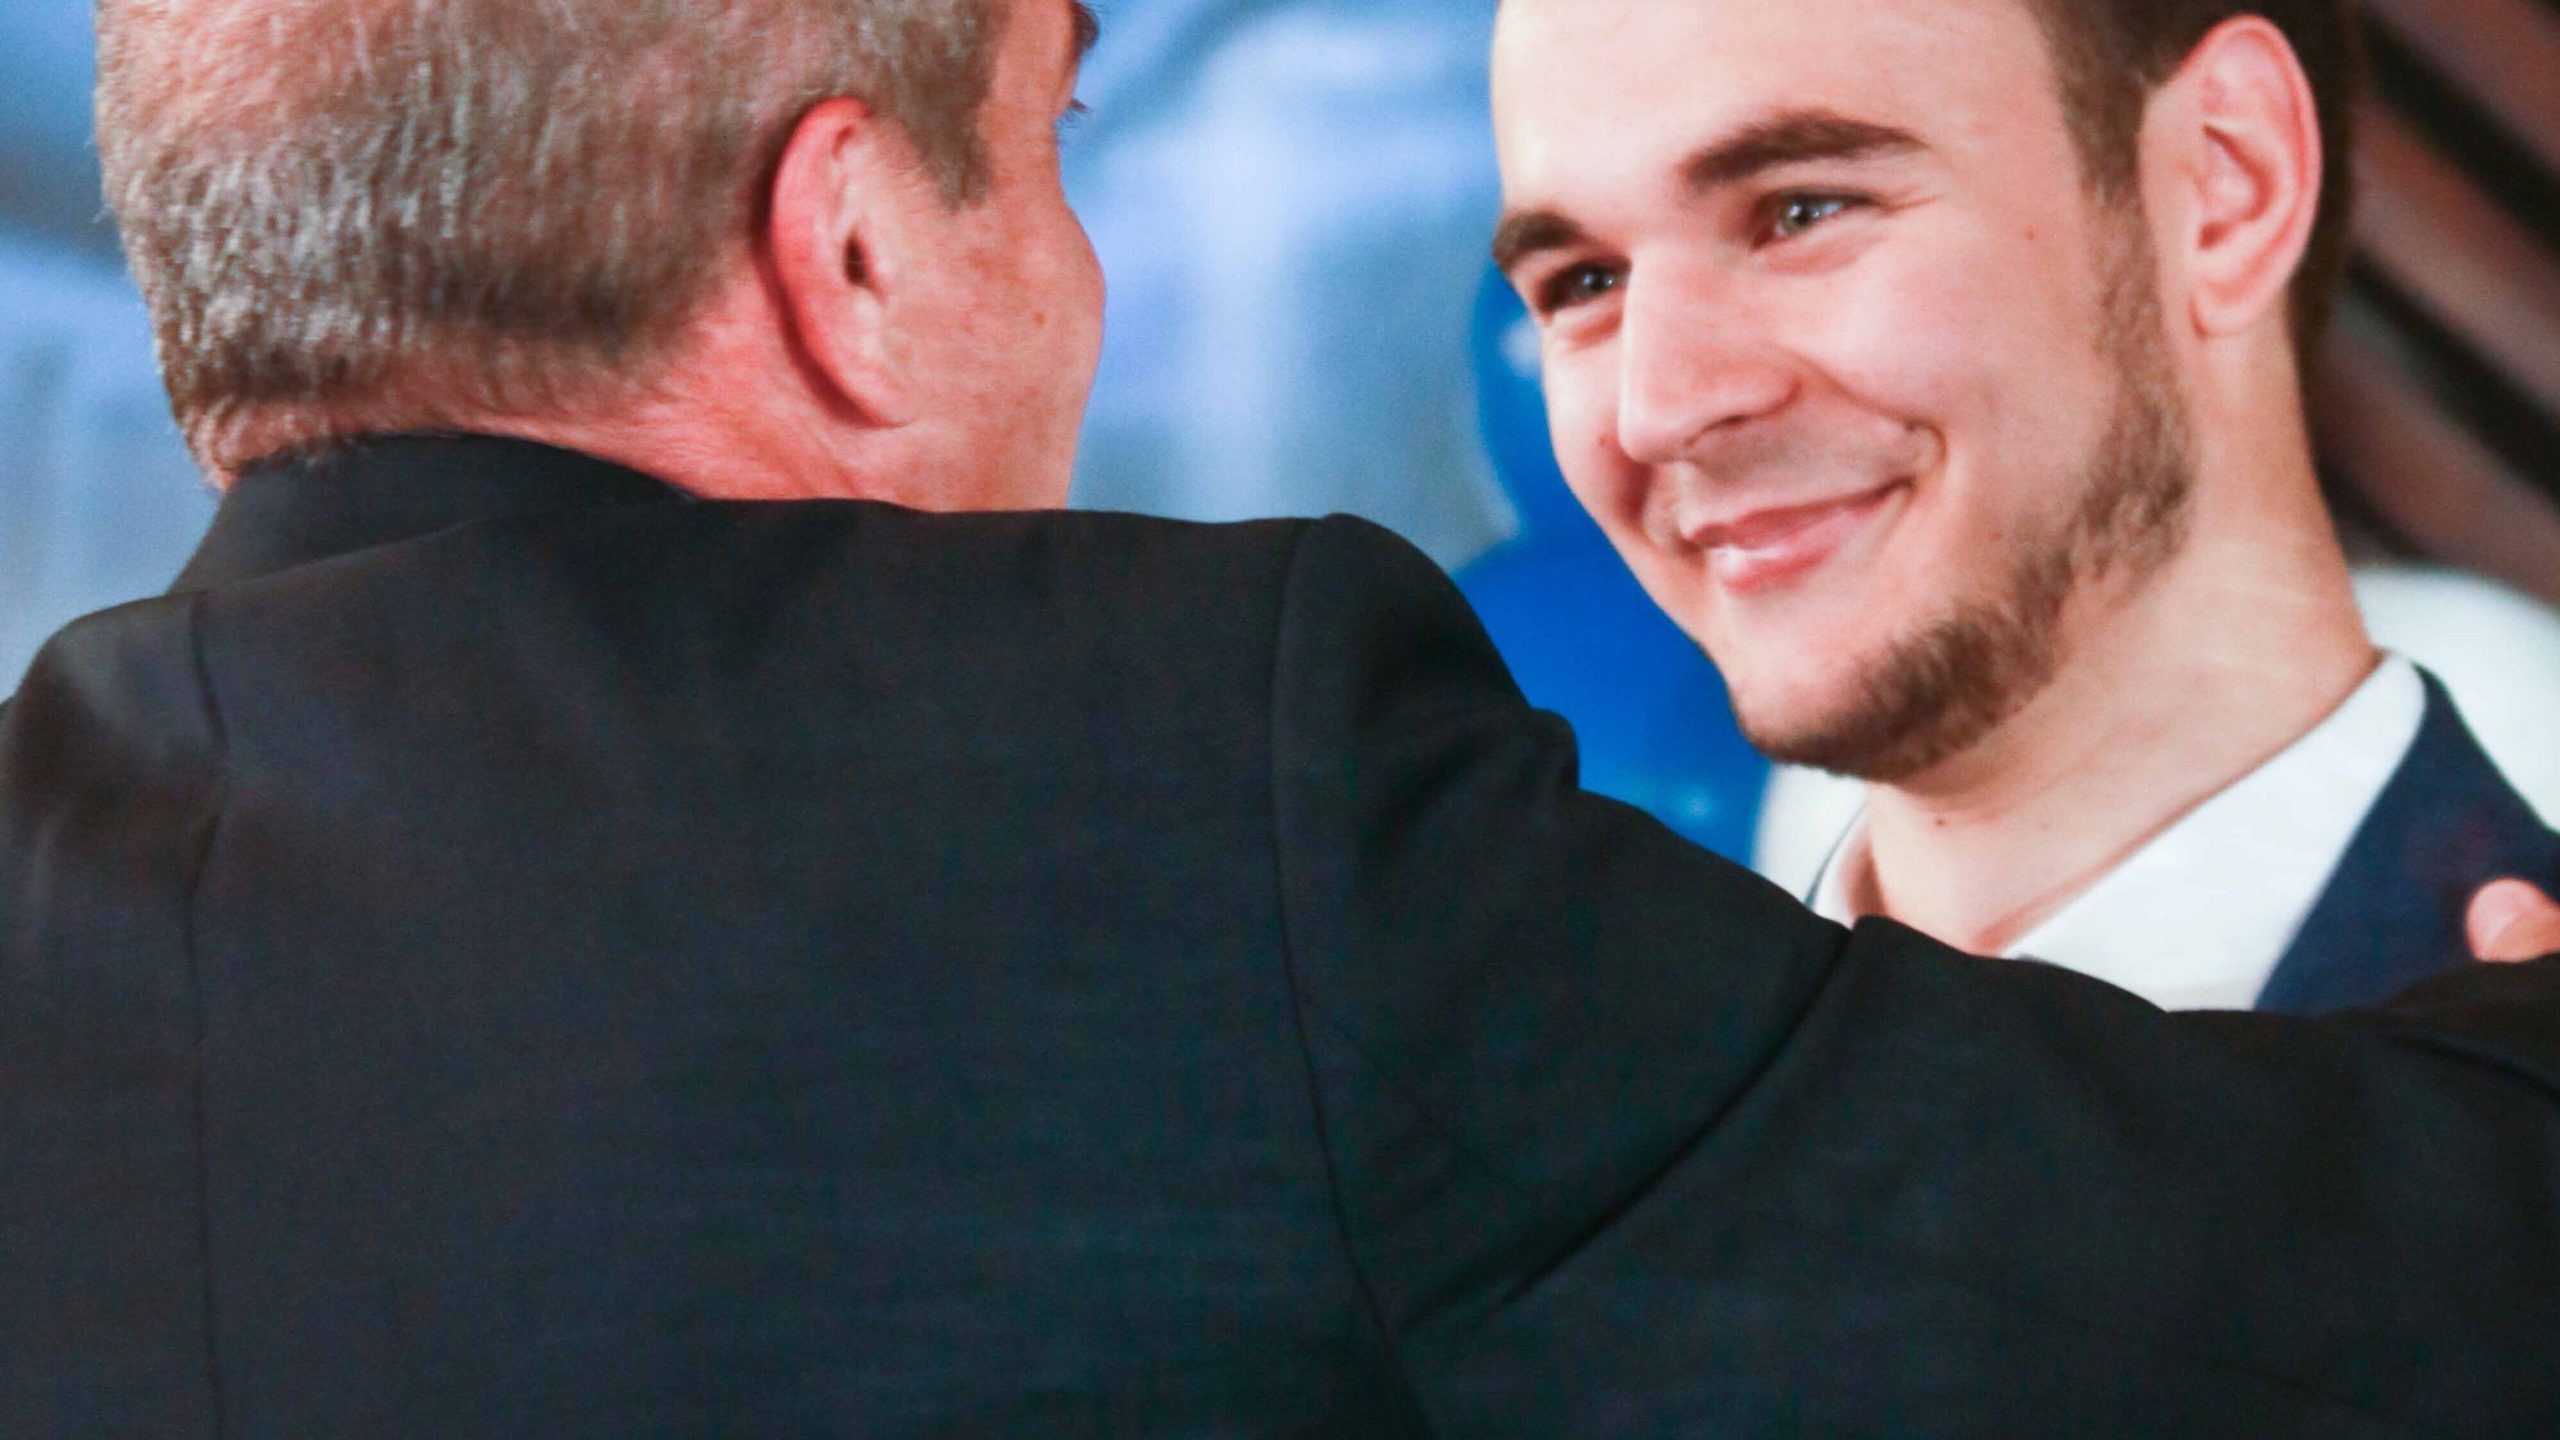 Mentor places hand on the shoulder of a smiling young man. Affirmations are being exchanged.